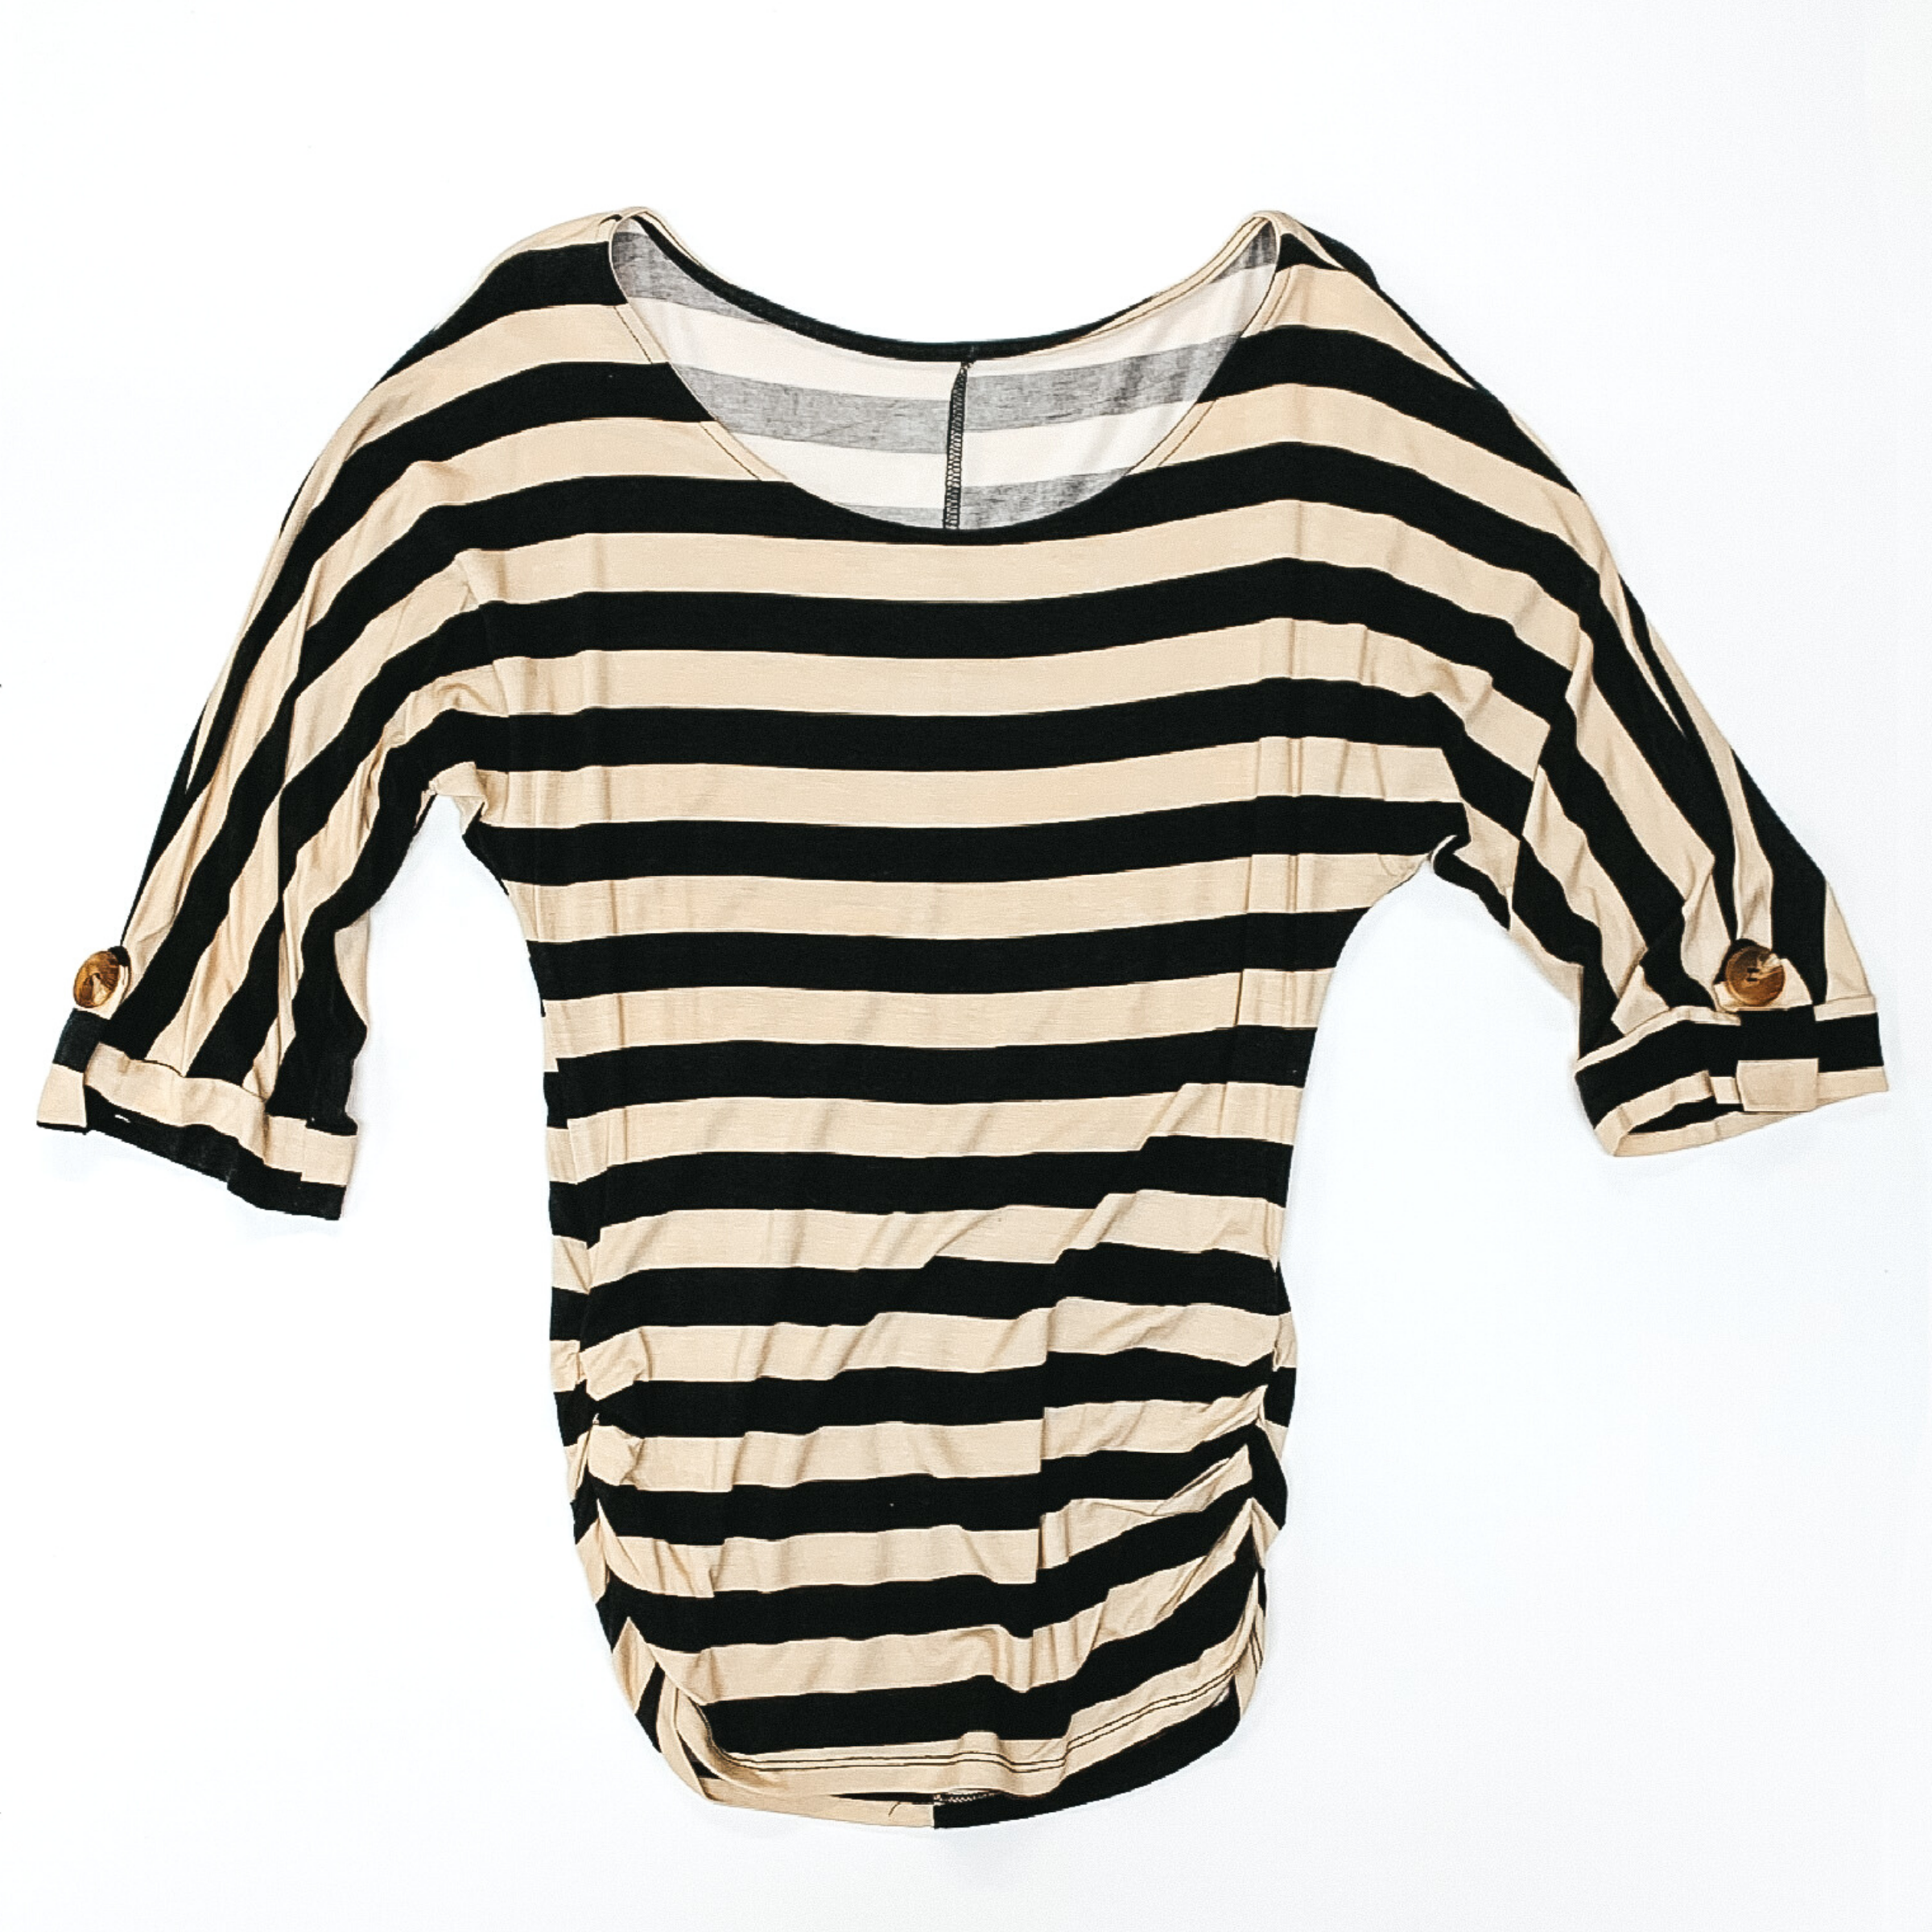 Striped 3/4 Sleeve Top with Ruched Sides in Tan and Black - Giddy Up Glamour Boutique